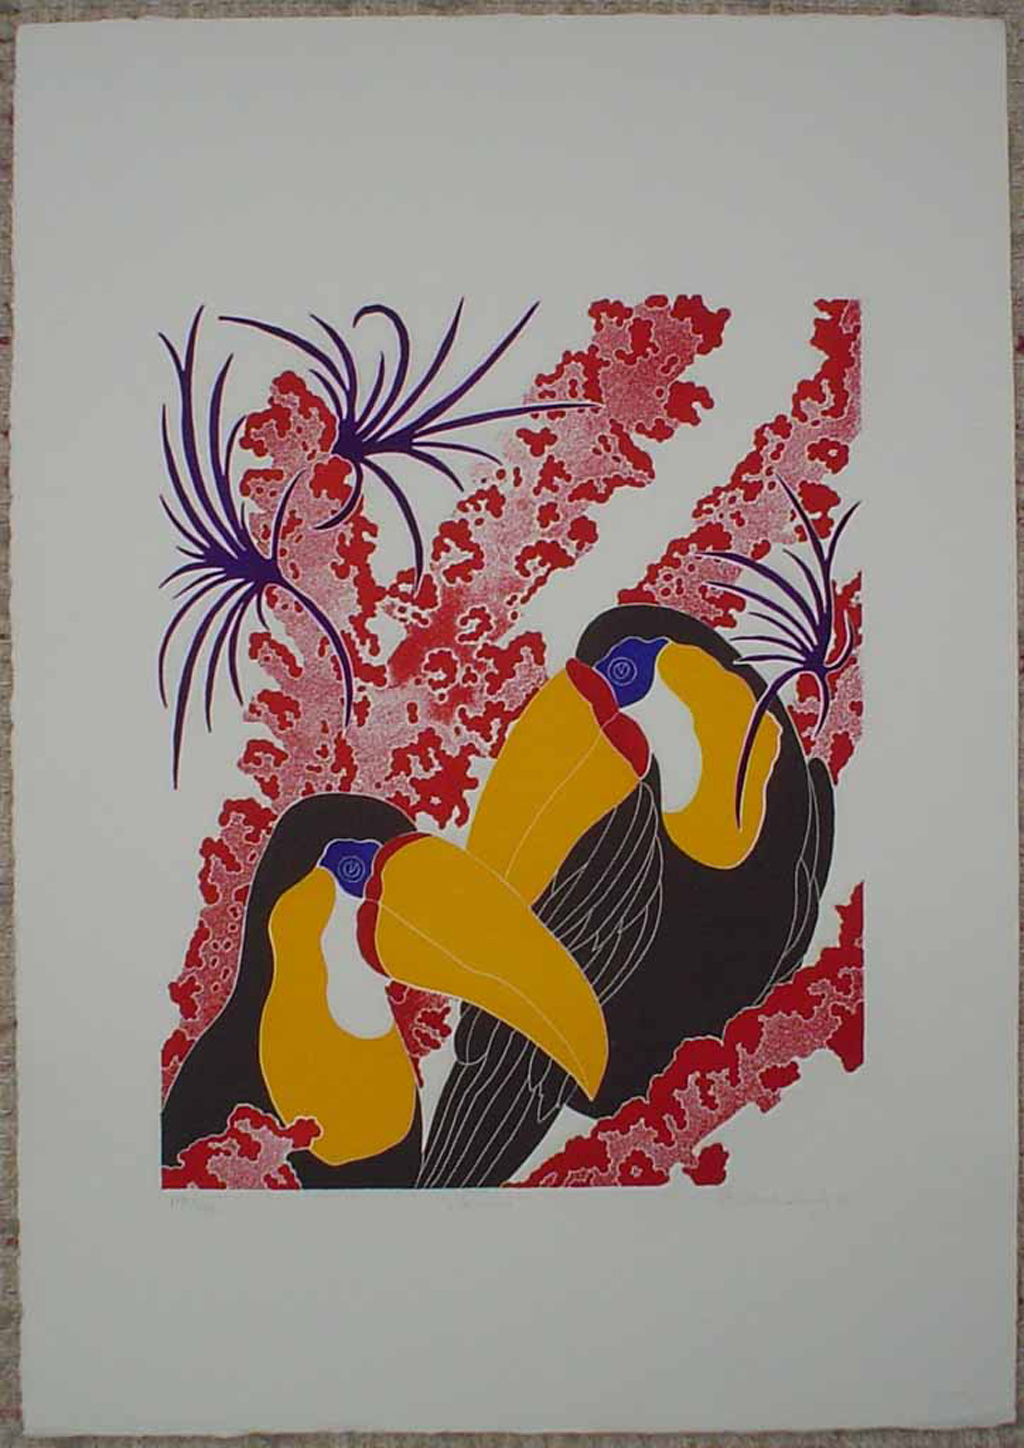 KerrisdaleGallery.com - stock ID#SG118ev-snt - Toucans by G. Clark Sealy, shown with full margins - original etching circa 1980s, limited editon, numbered 118/175, titled and signed by the artist